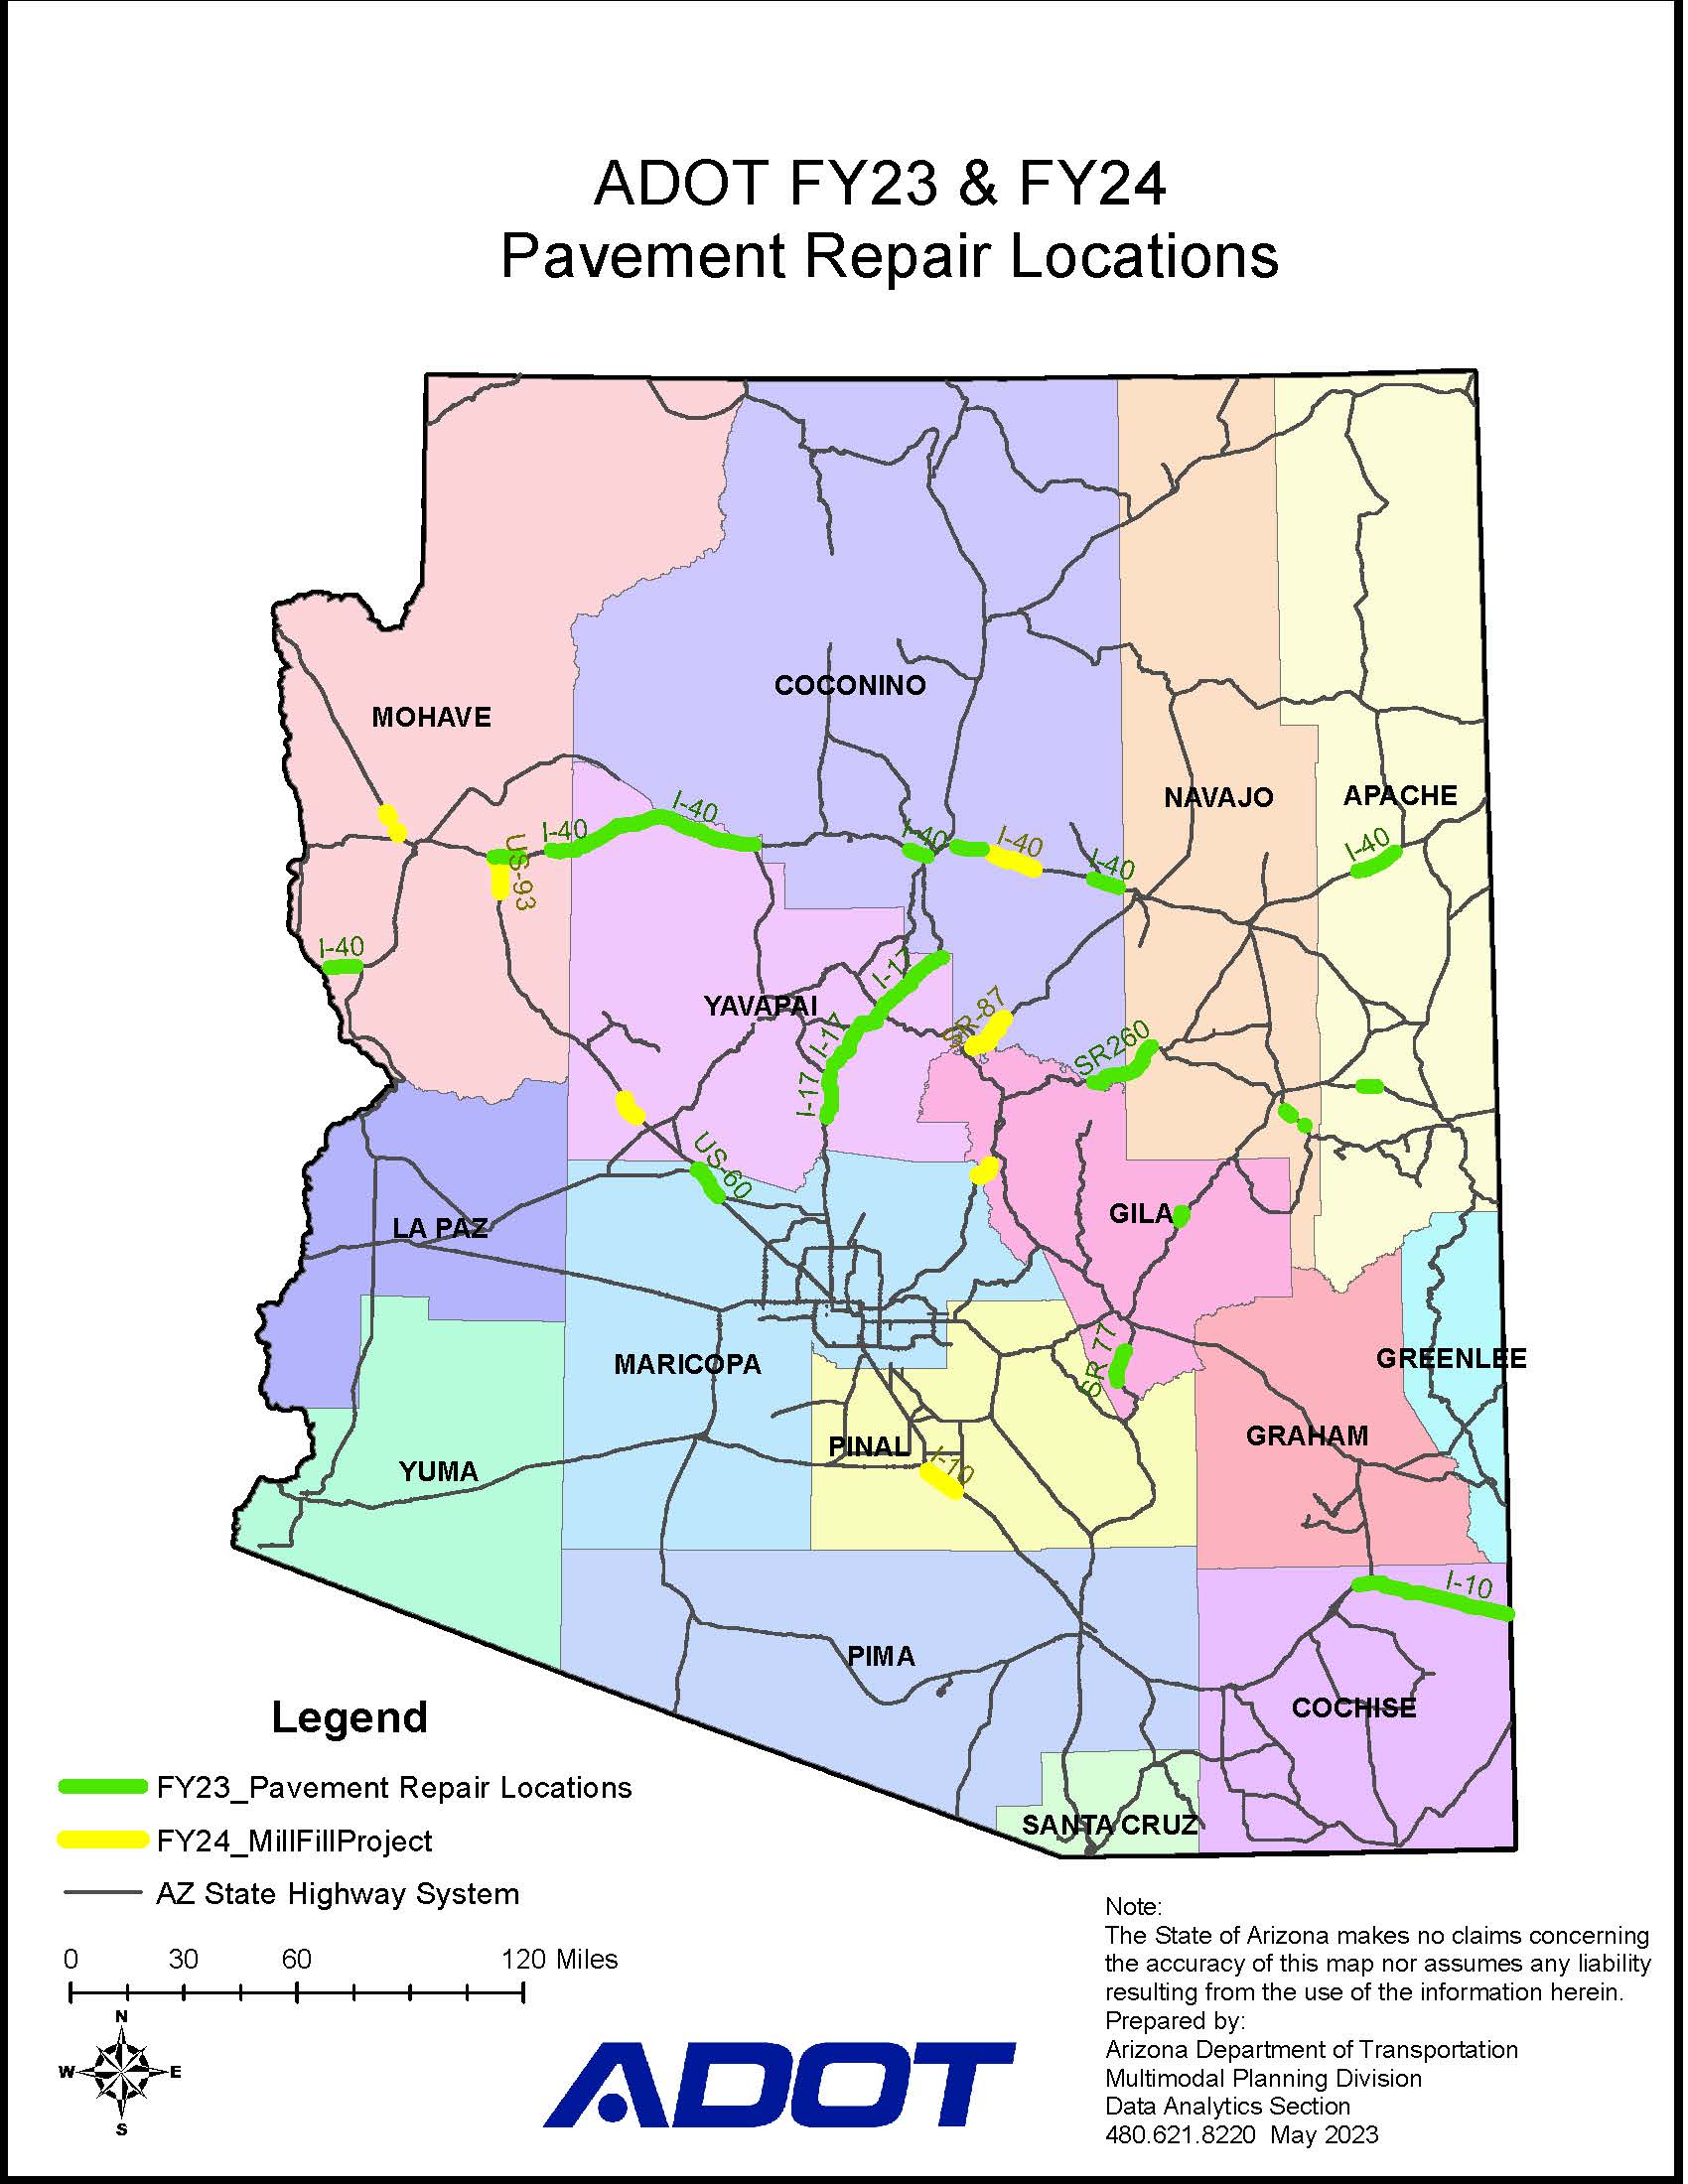 ADOT FY23-24 Pavement Repair Locations Update